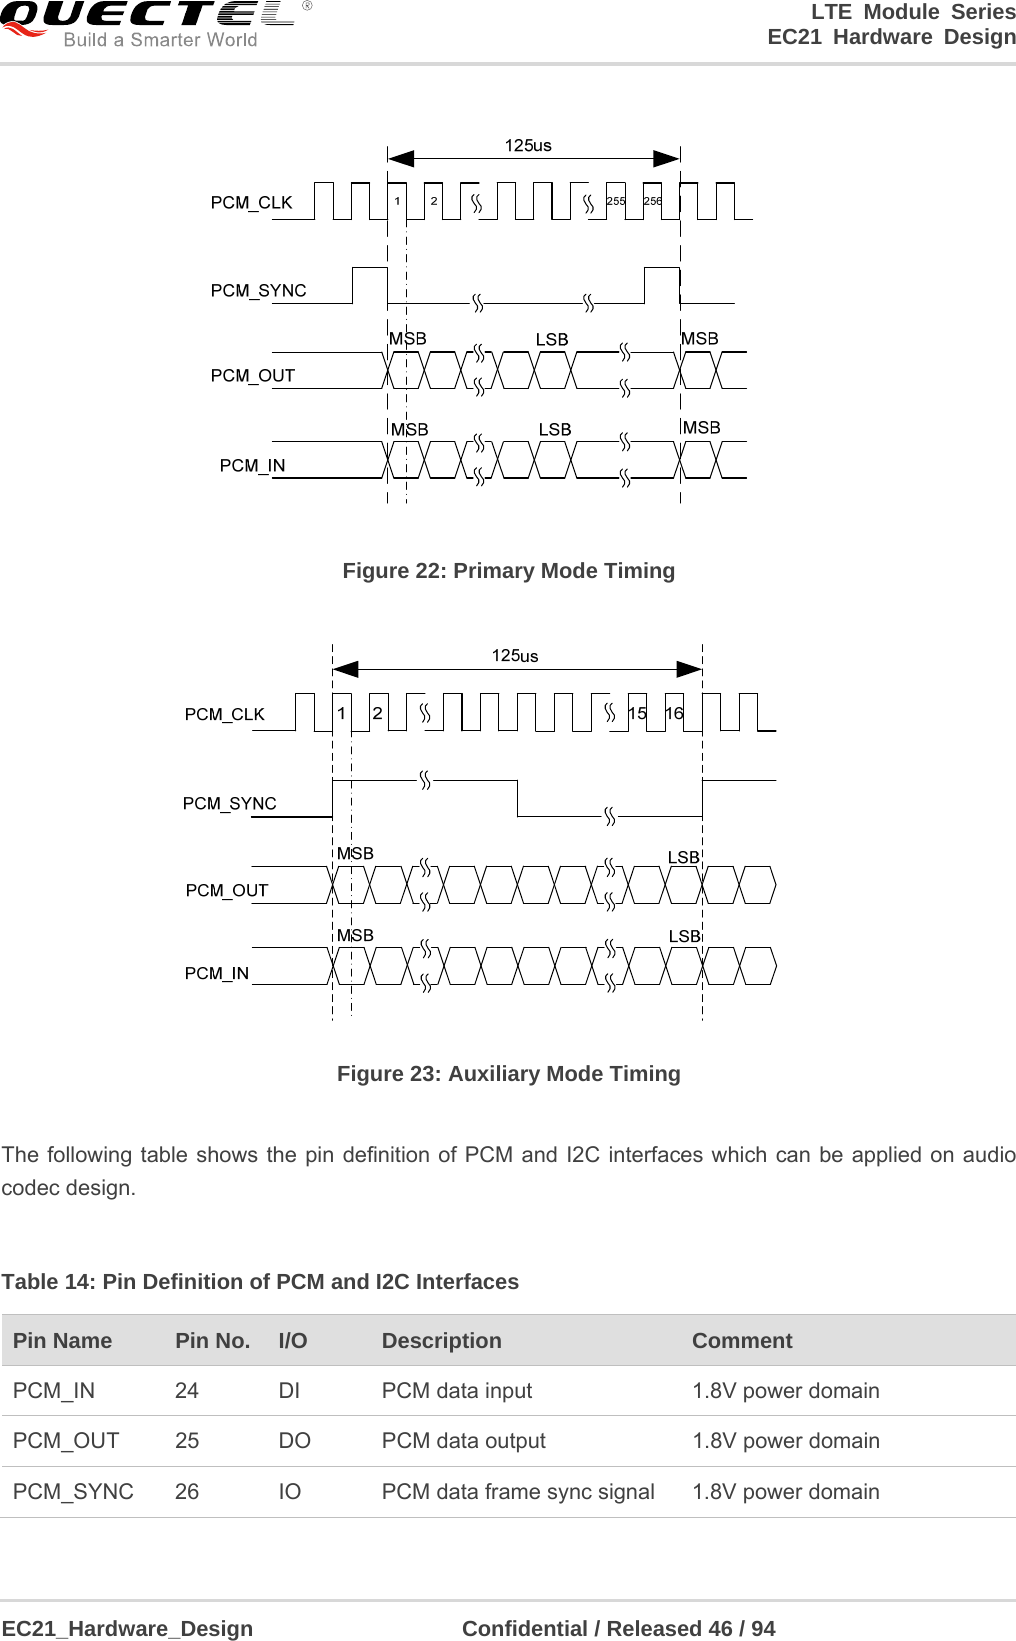 LTE Module Series                                                                 EC21 Hardware Design  EC21_Hardware_Design                   Confidential / Released 46 / 94     Figure 22: Primary Mode Timing  Figure 23: Auxiliary Mode Timing  The following table shows the pin definition of PCM and I2C interfaces which can be applied on audio codec design.  Table 14: Pin Definition of PCM and I2C Interfaces Pin Name    Pin No.  I/O  Description   Comment PCM_IN  24  DI  PCM data input  1.8V power domain PCM_OUT  25  DO  PCM data output  1.8V power domain PCM_SYNC  26  IO  PCM data frame sync signal  1.8V power domain 